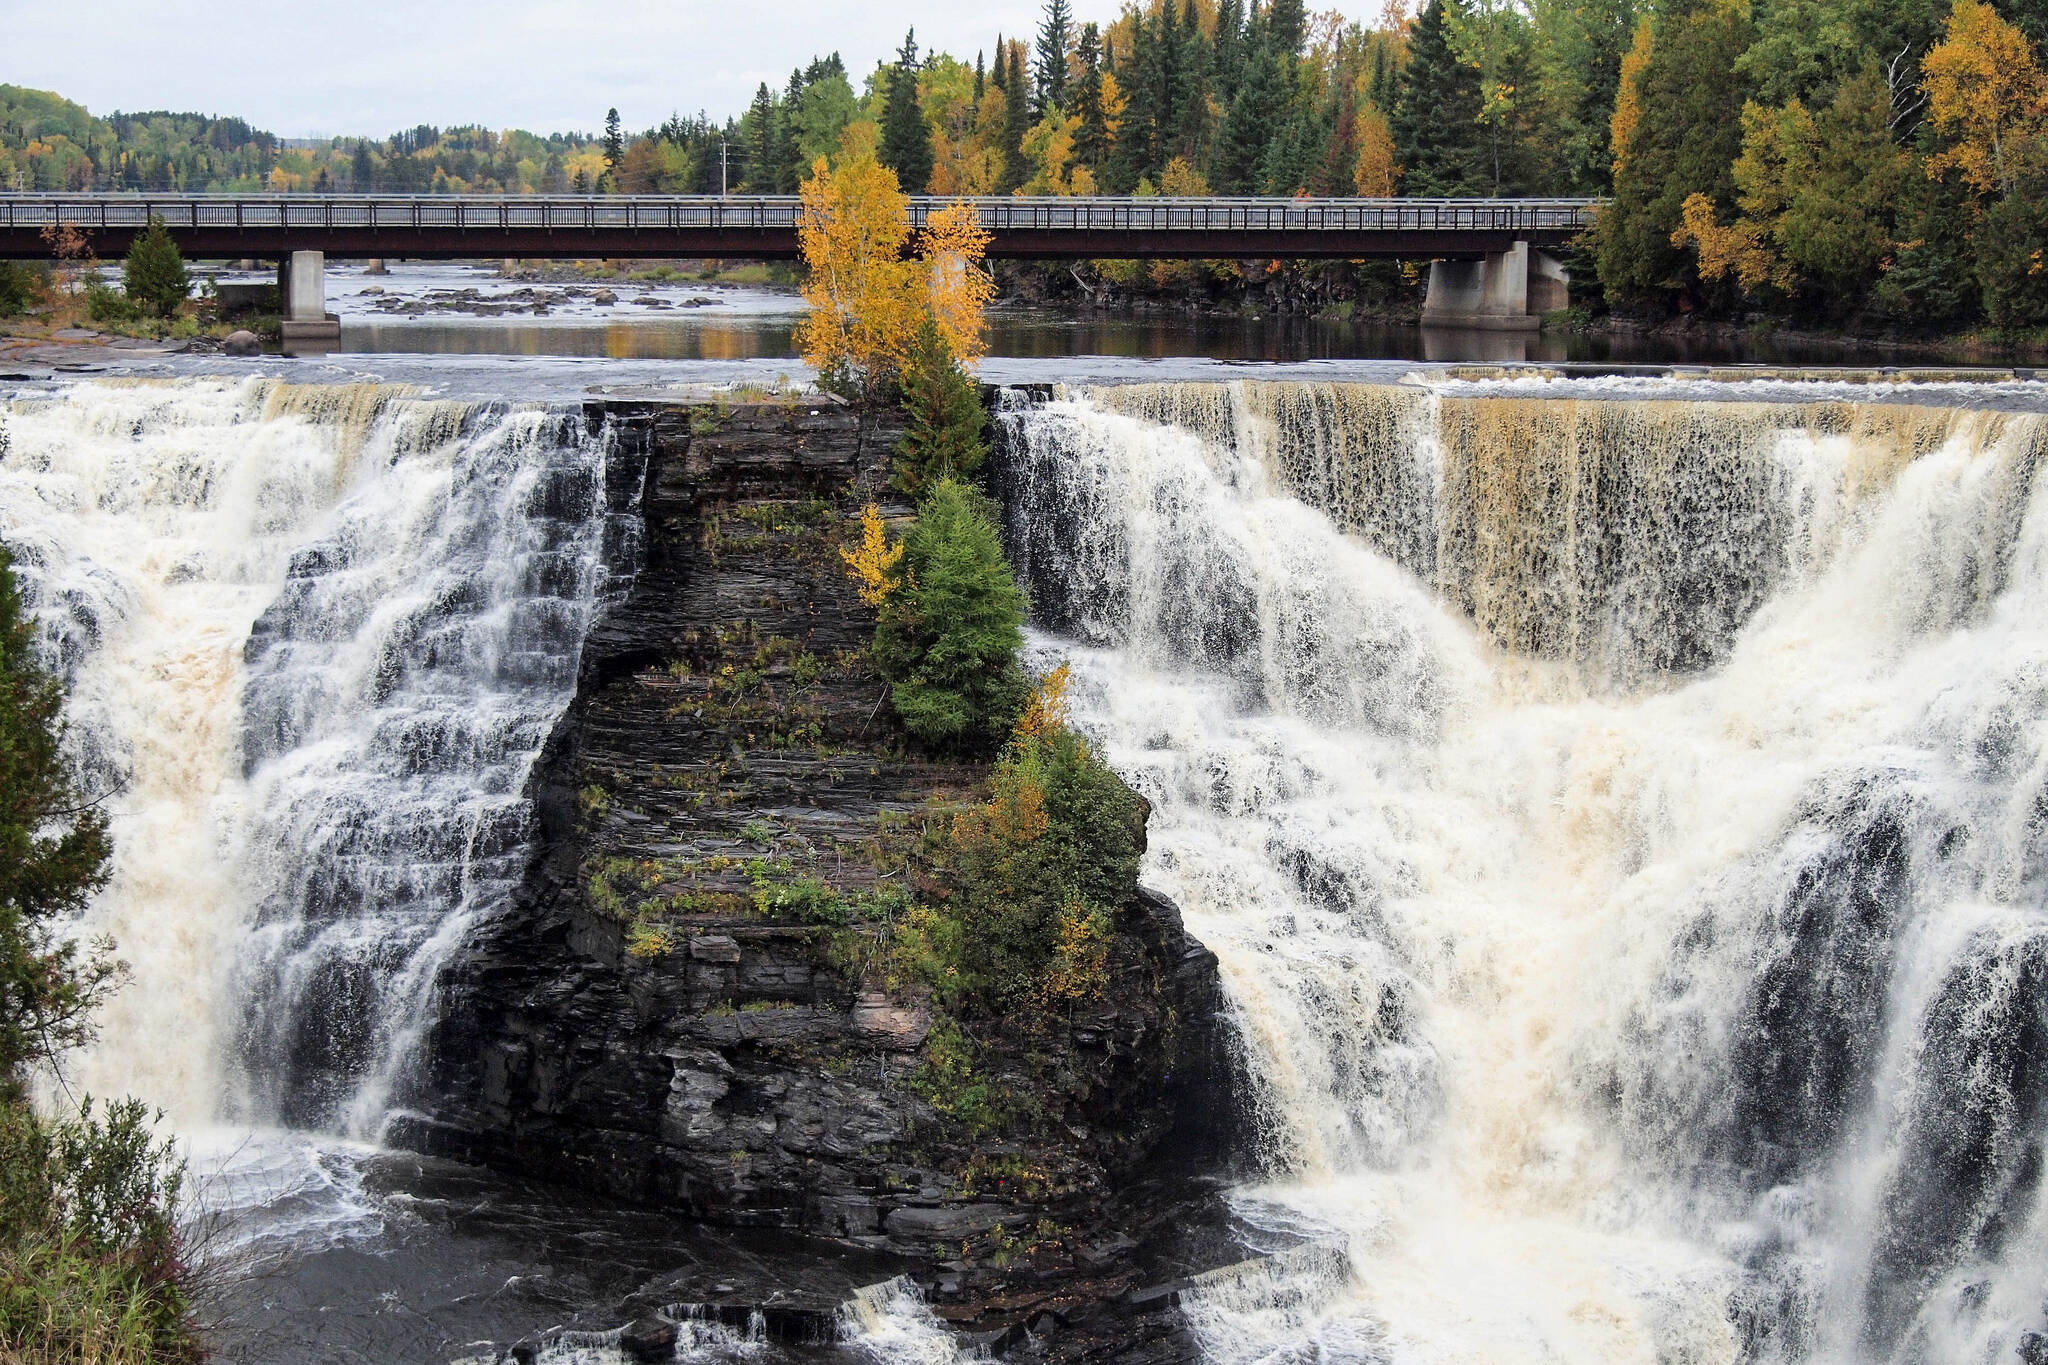 This epic waterfall is a once-in-a-lifetime Ontario roadtrip